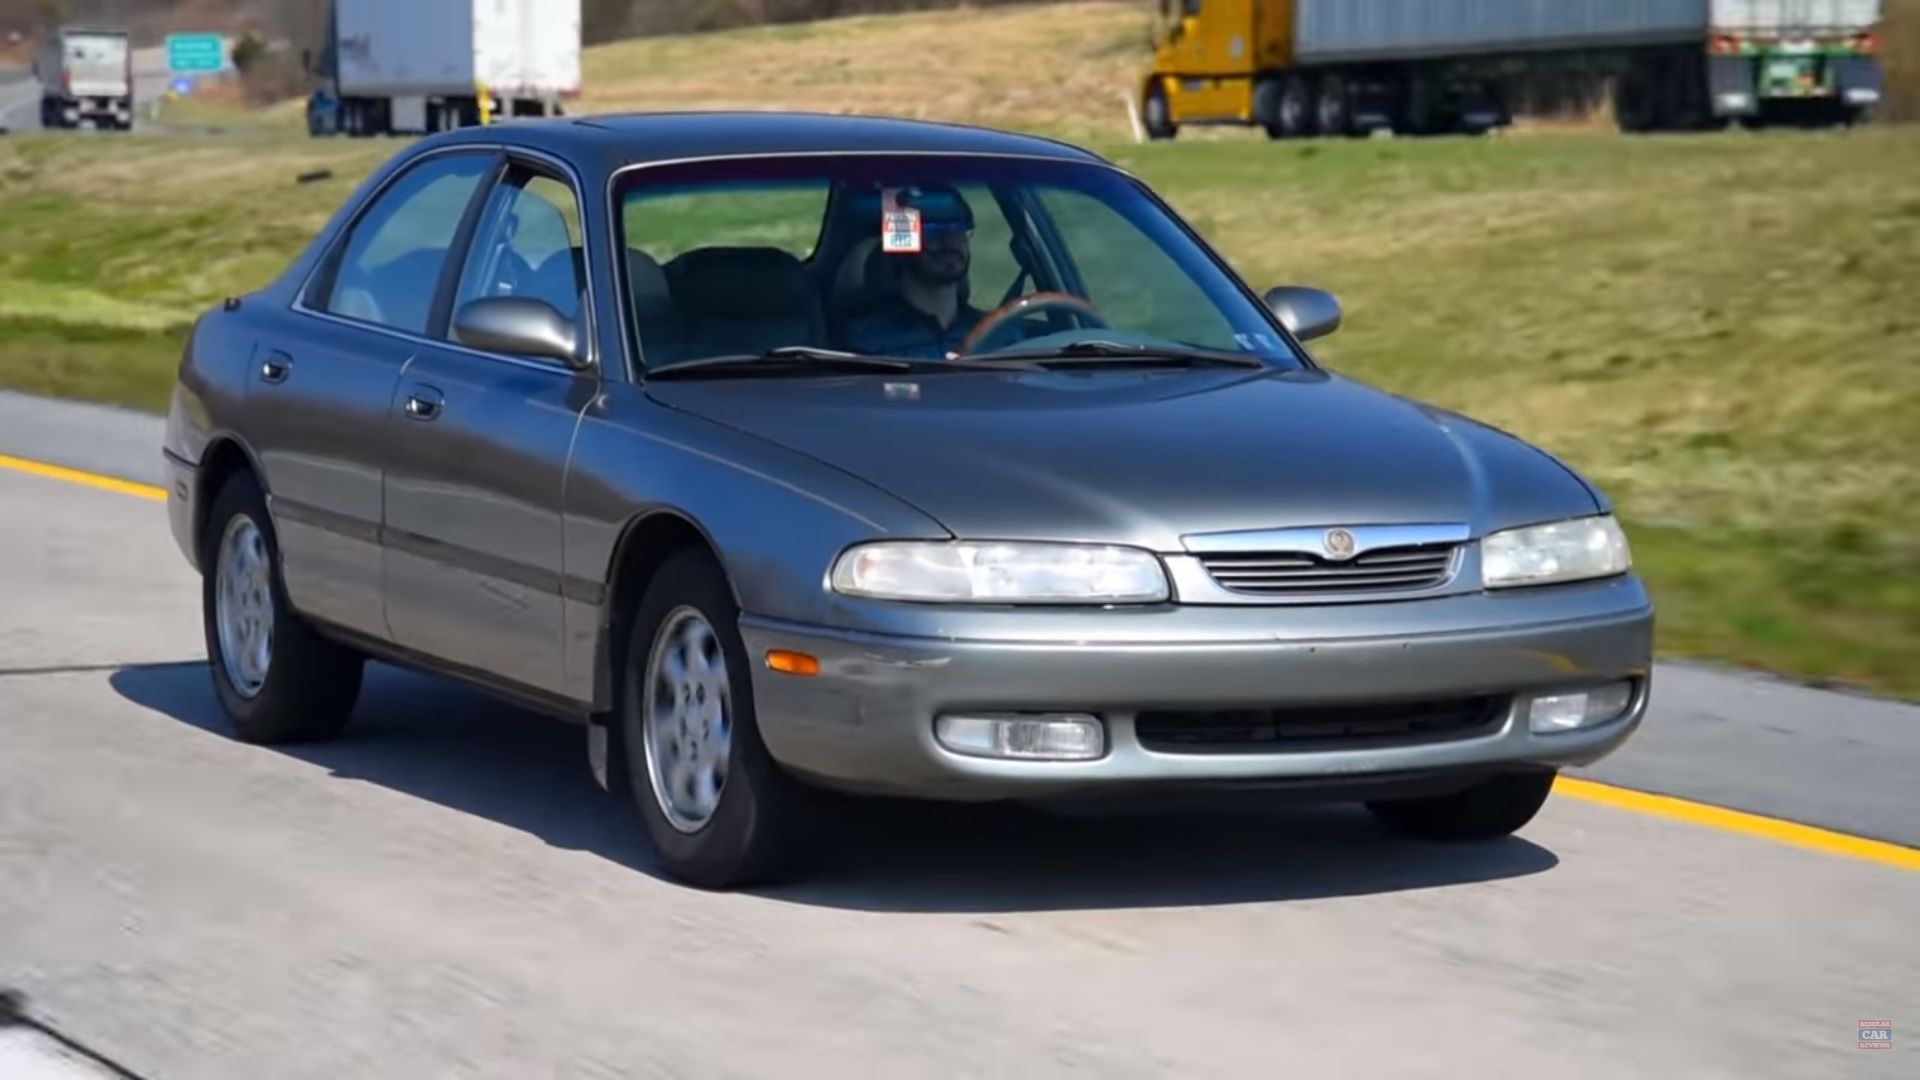 This Review of a 1997 Mazda 626 Will Take You Back to Much Simpler Times  With A Few Laughs Included